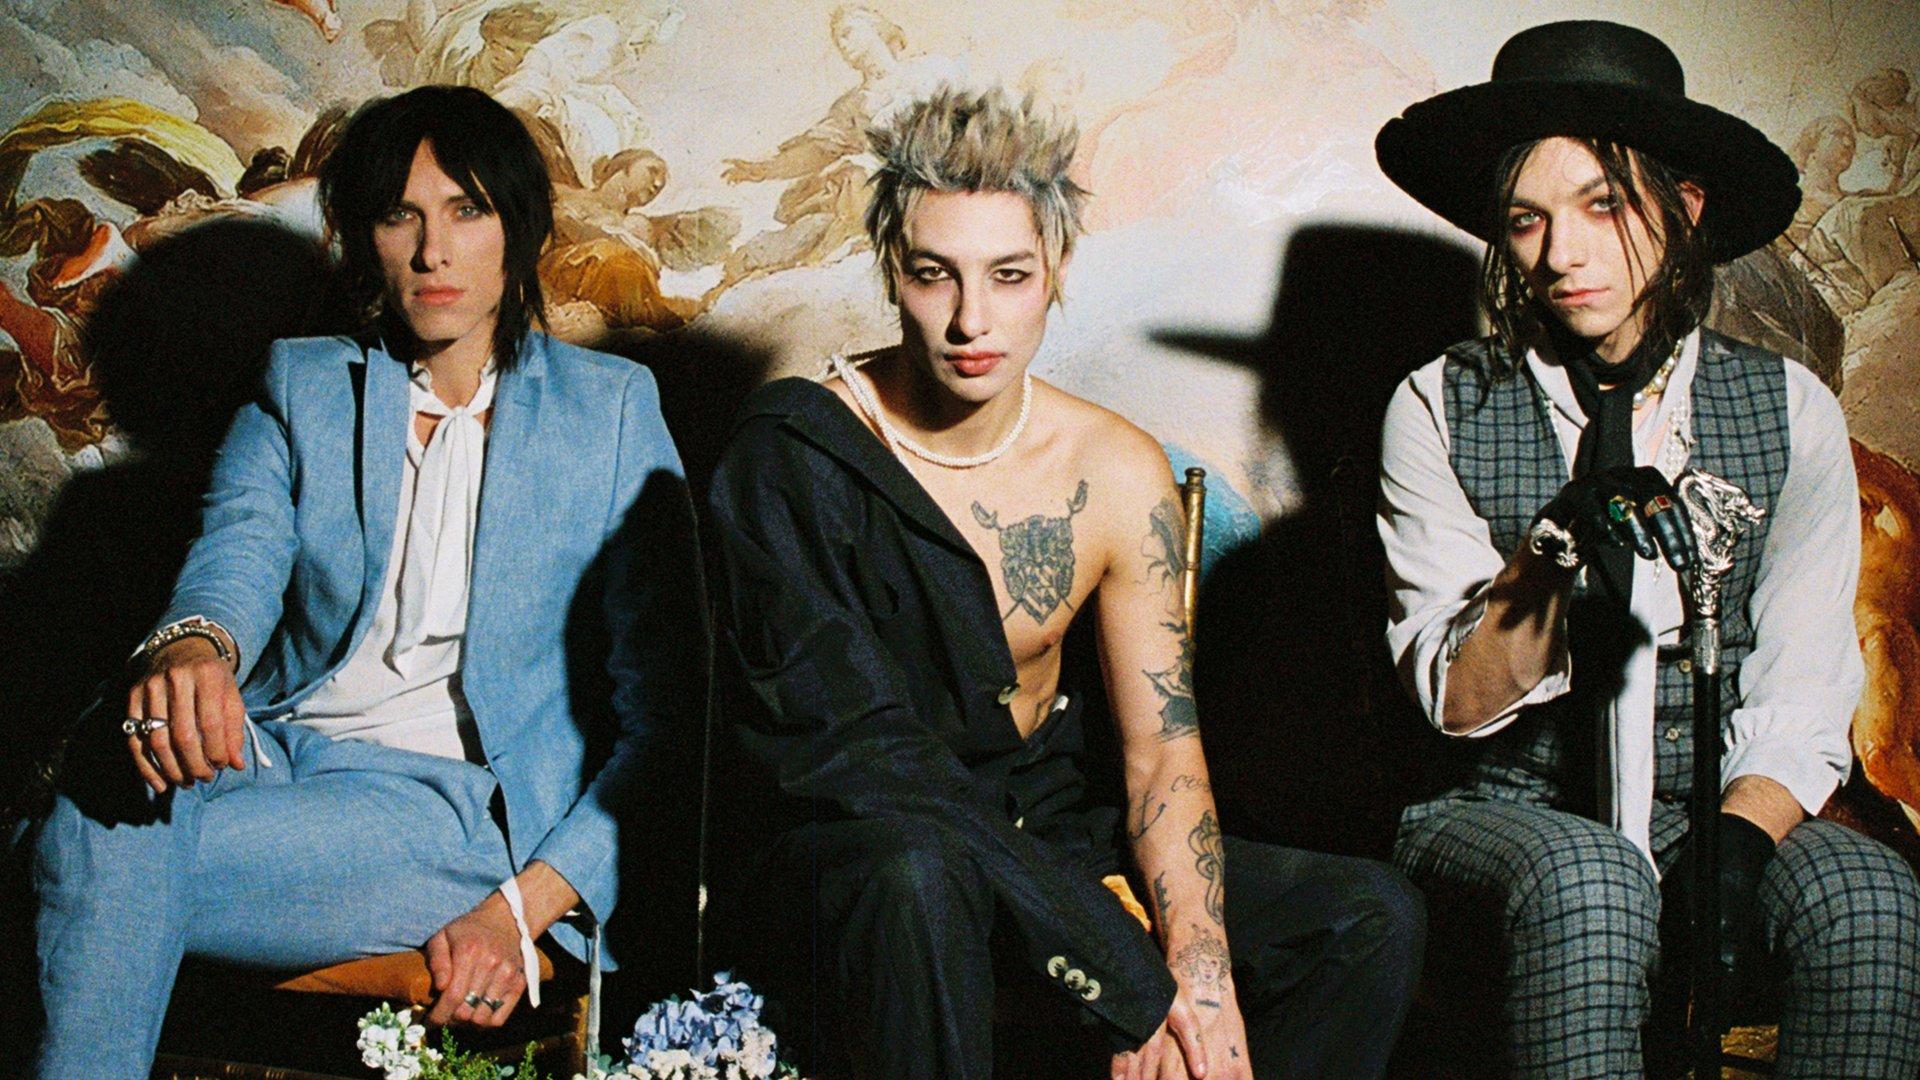 The three brothers of Palaye Royale pose together, seated